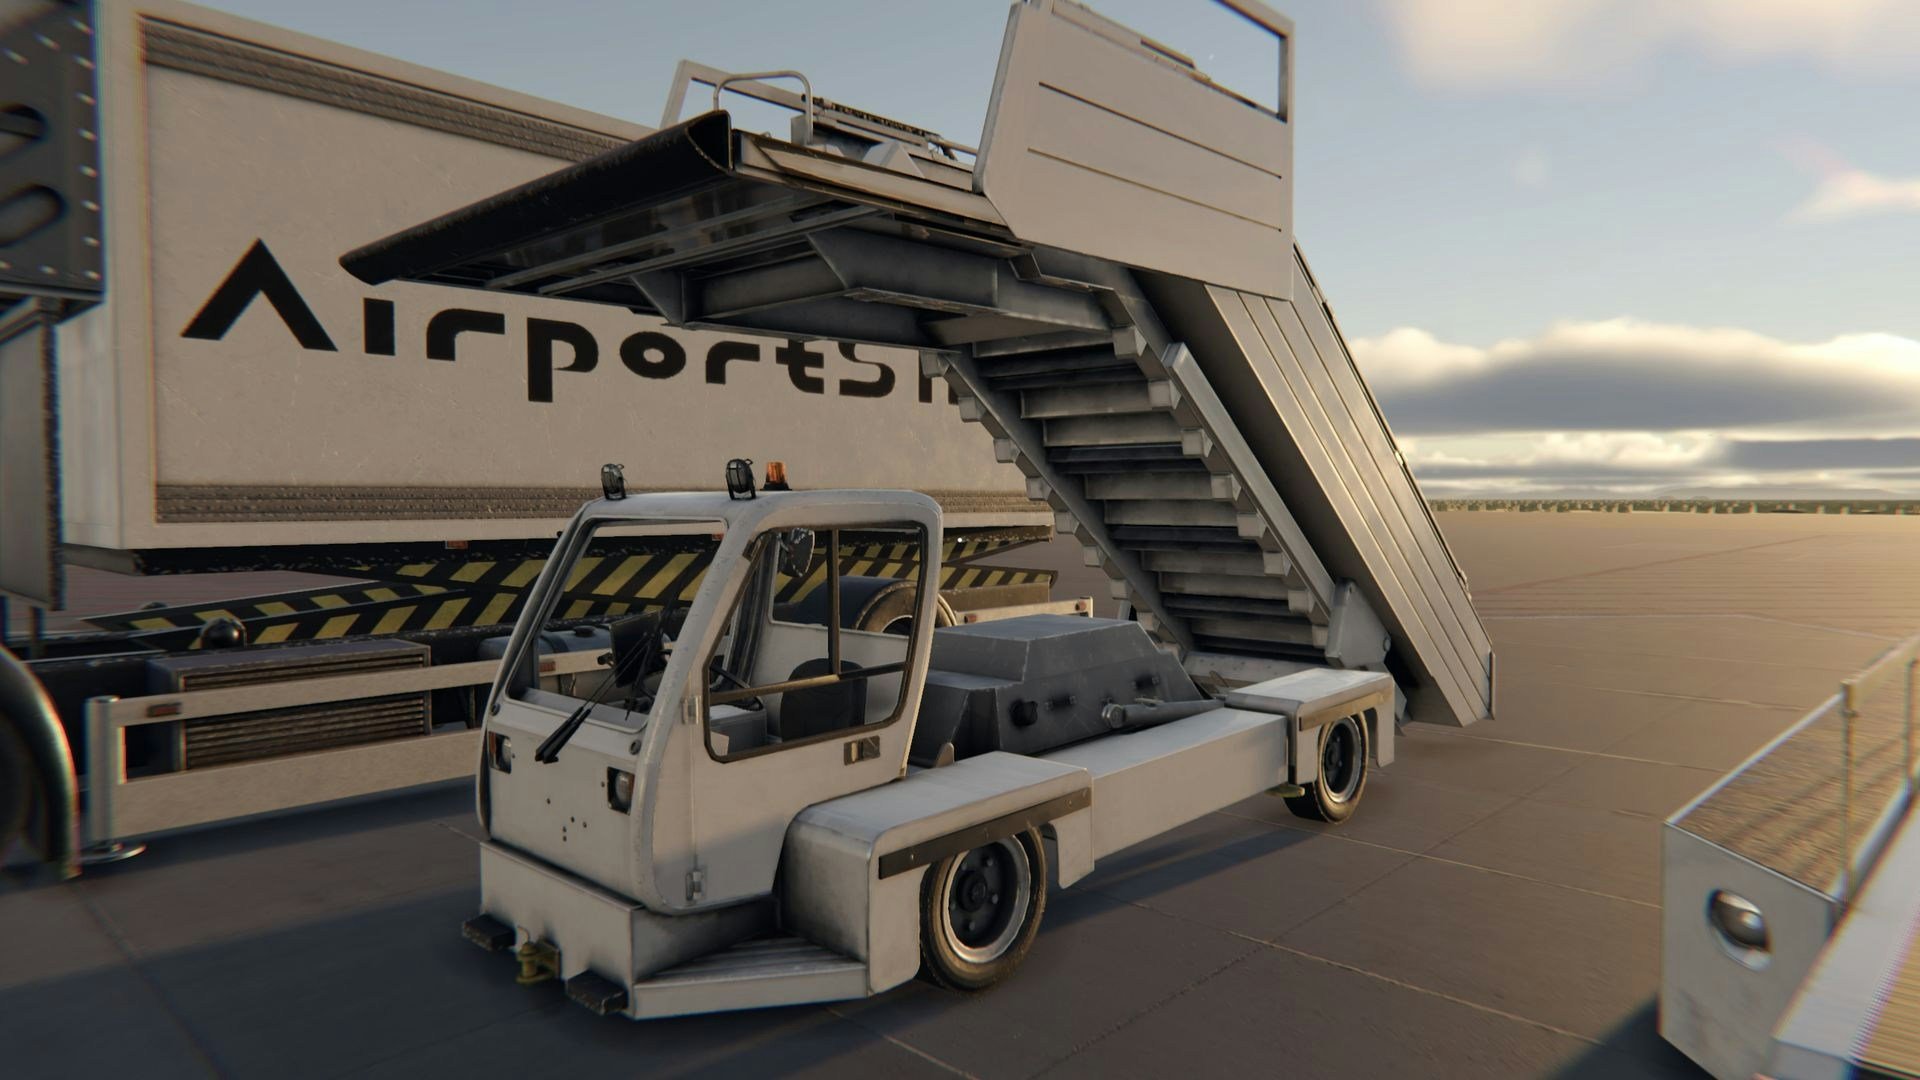 Experience the Life of a Ground Handler with AirportSim by MS Games